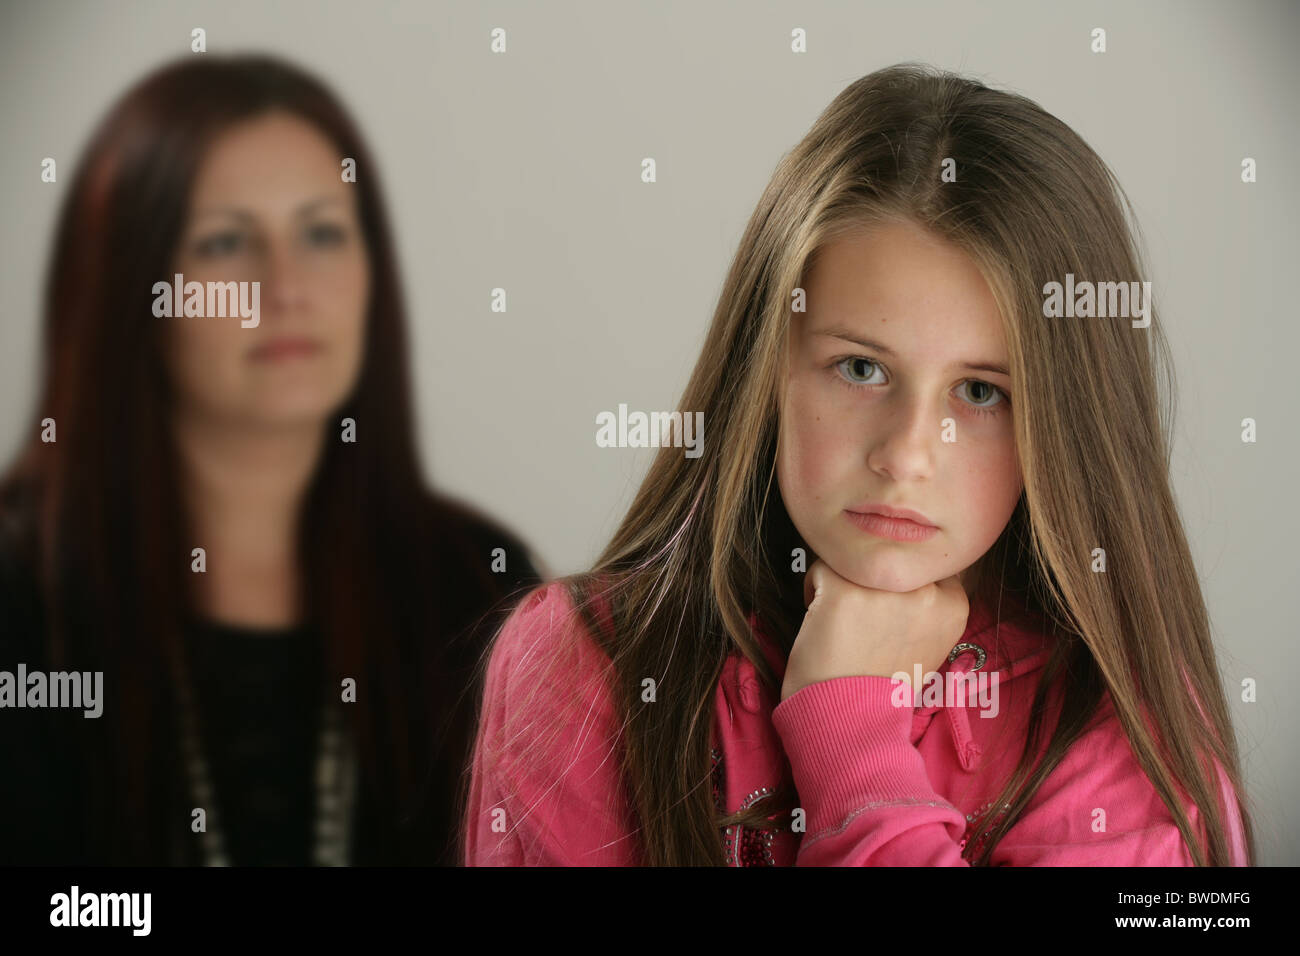 A sad ten year old girl with her mother in the background. Stock Photo